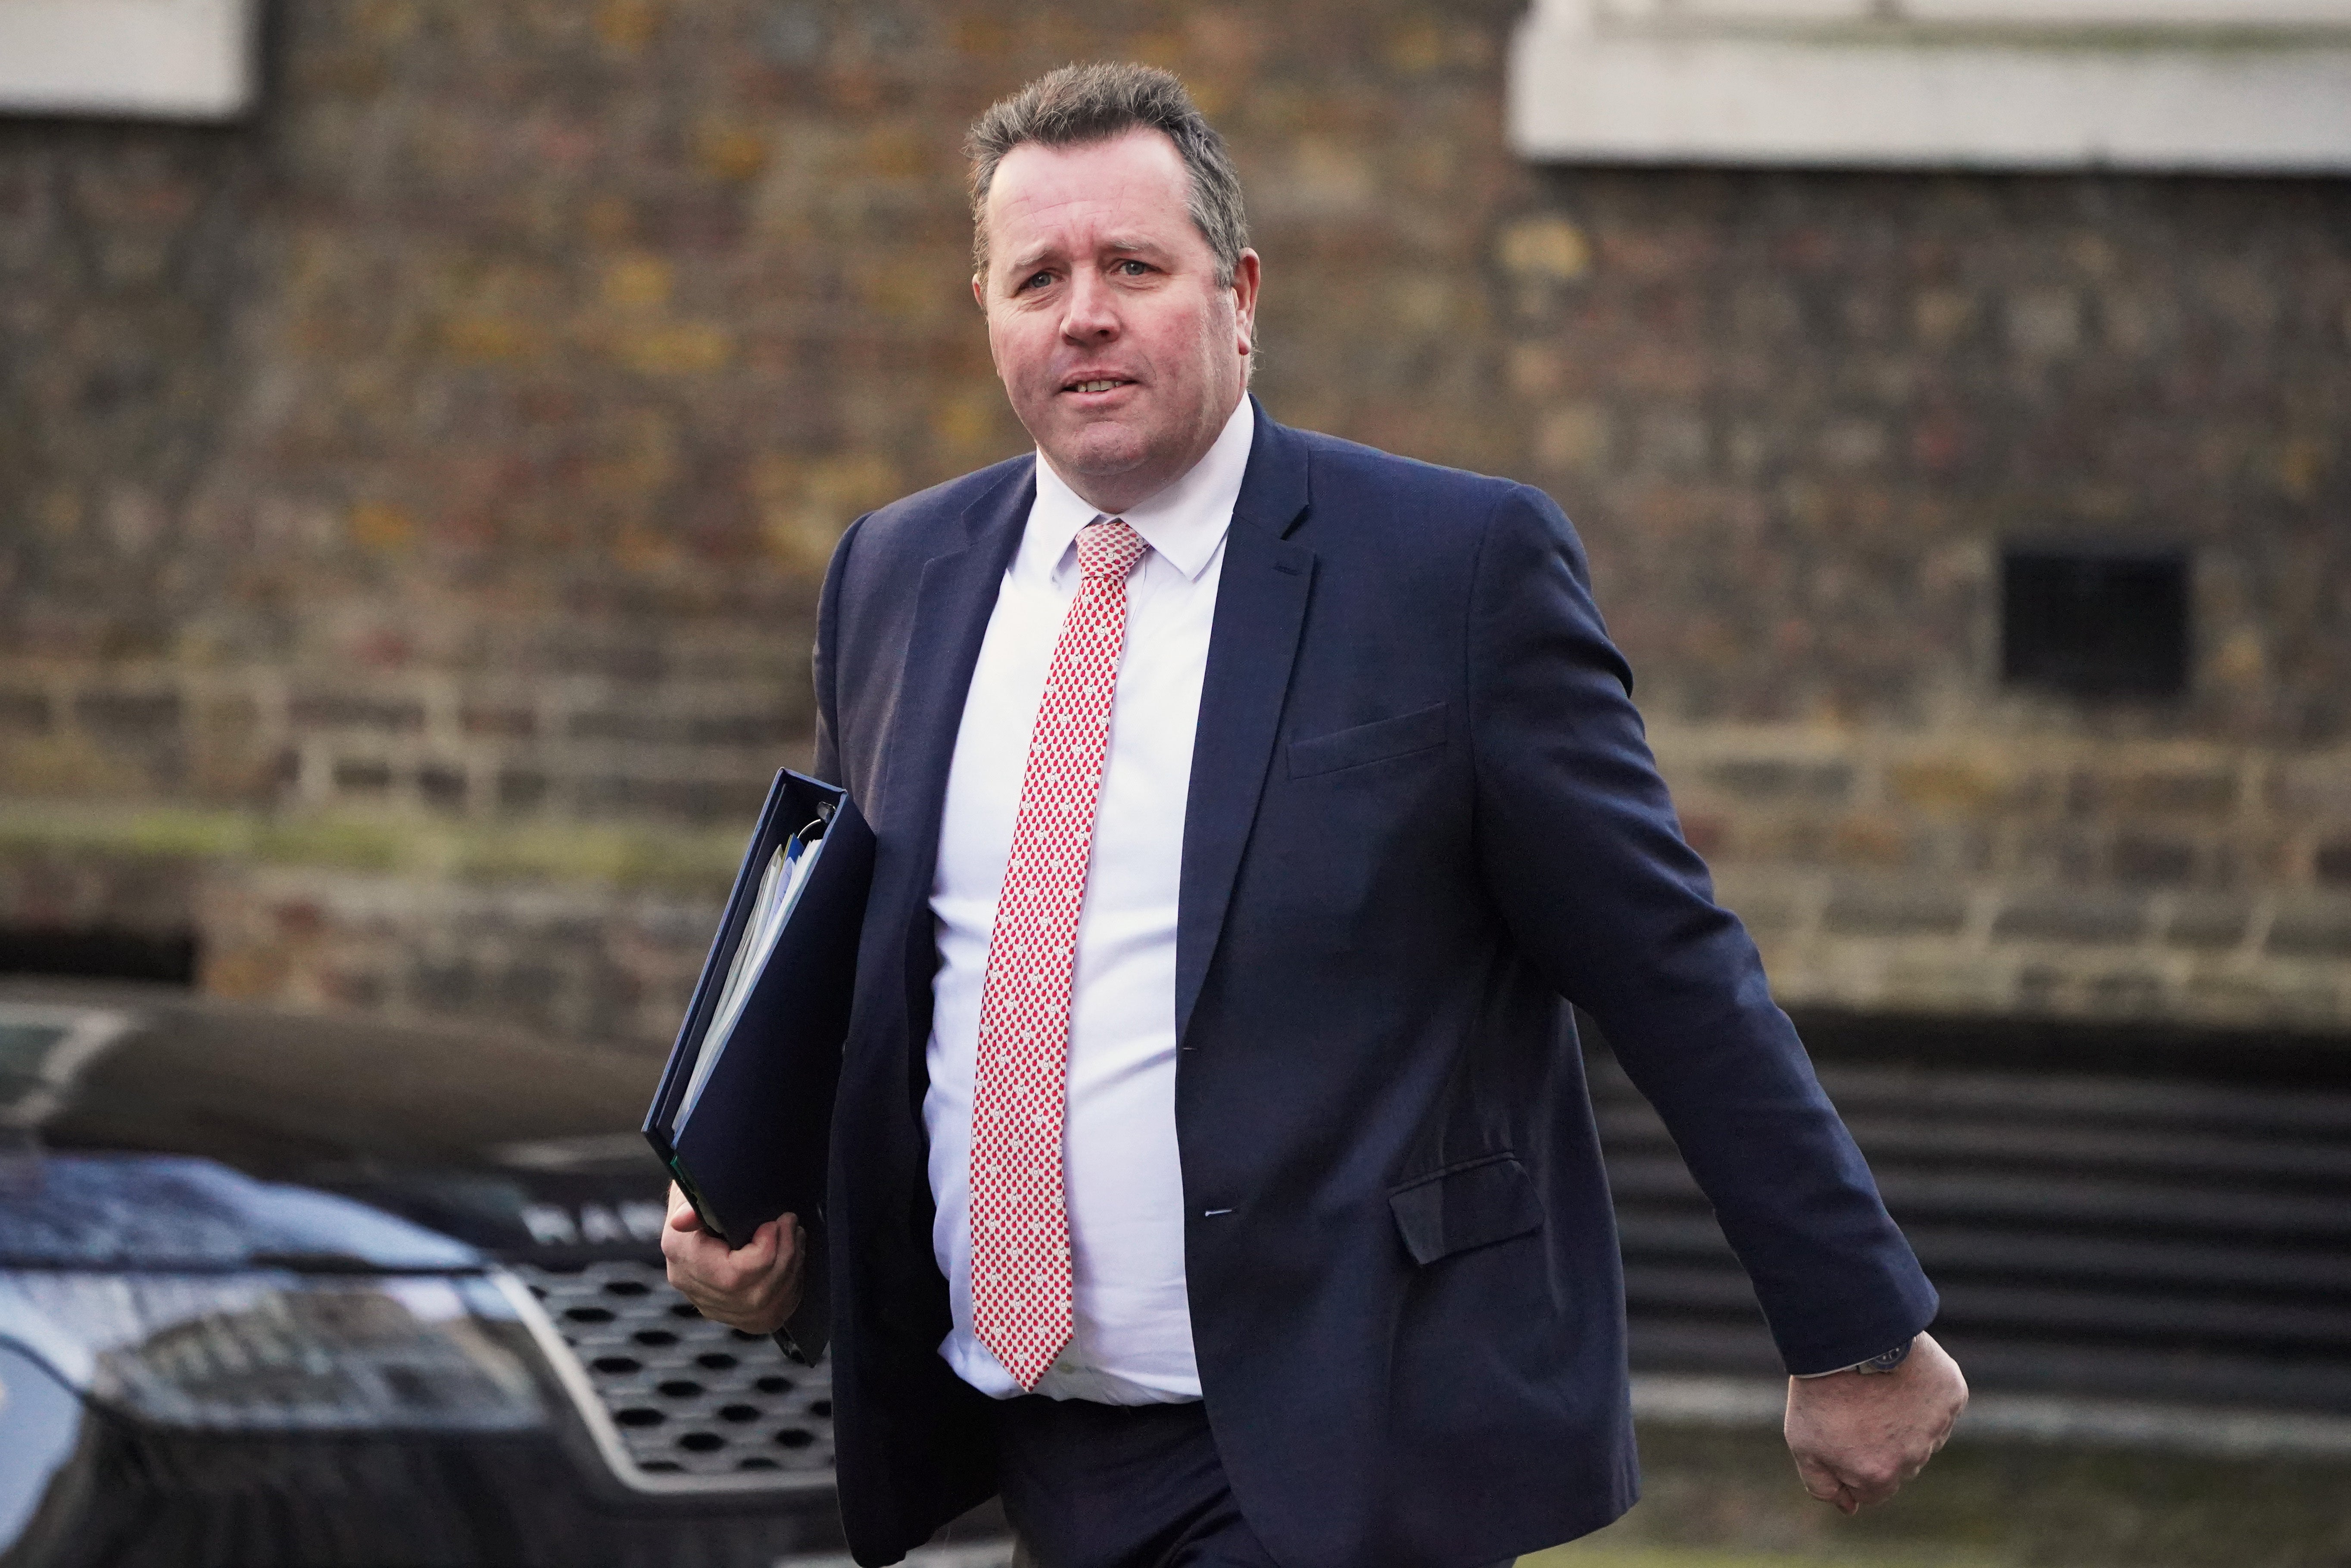 Leader of the House Mark Spencer said the Government would act on rising food prices as required. (Jonathan Brady / PA)